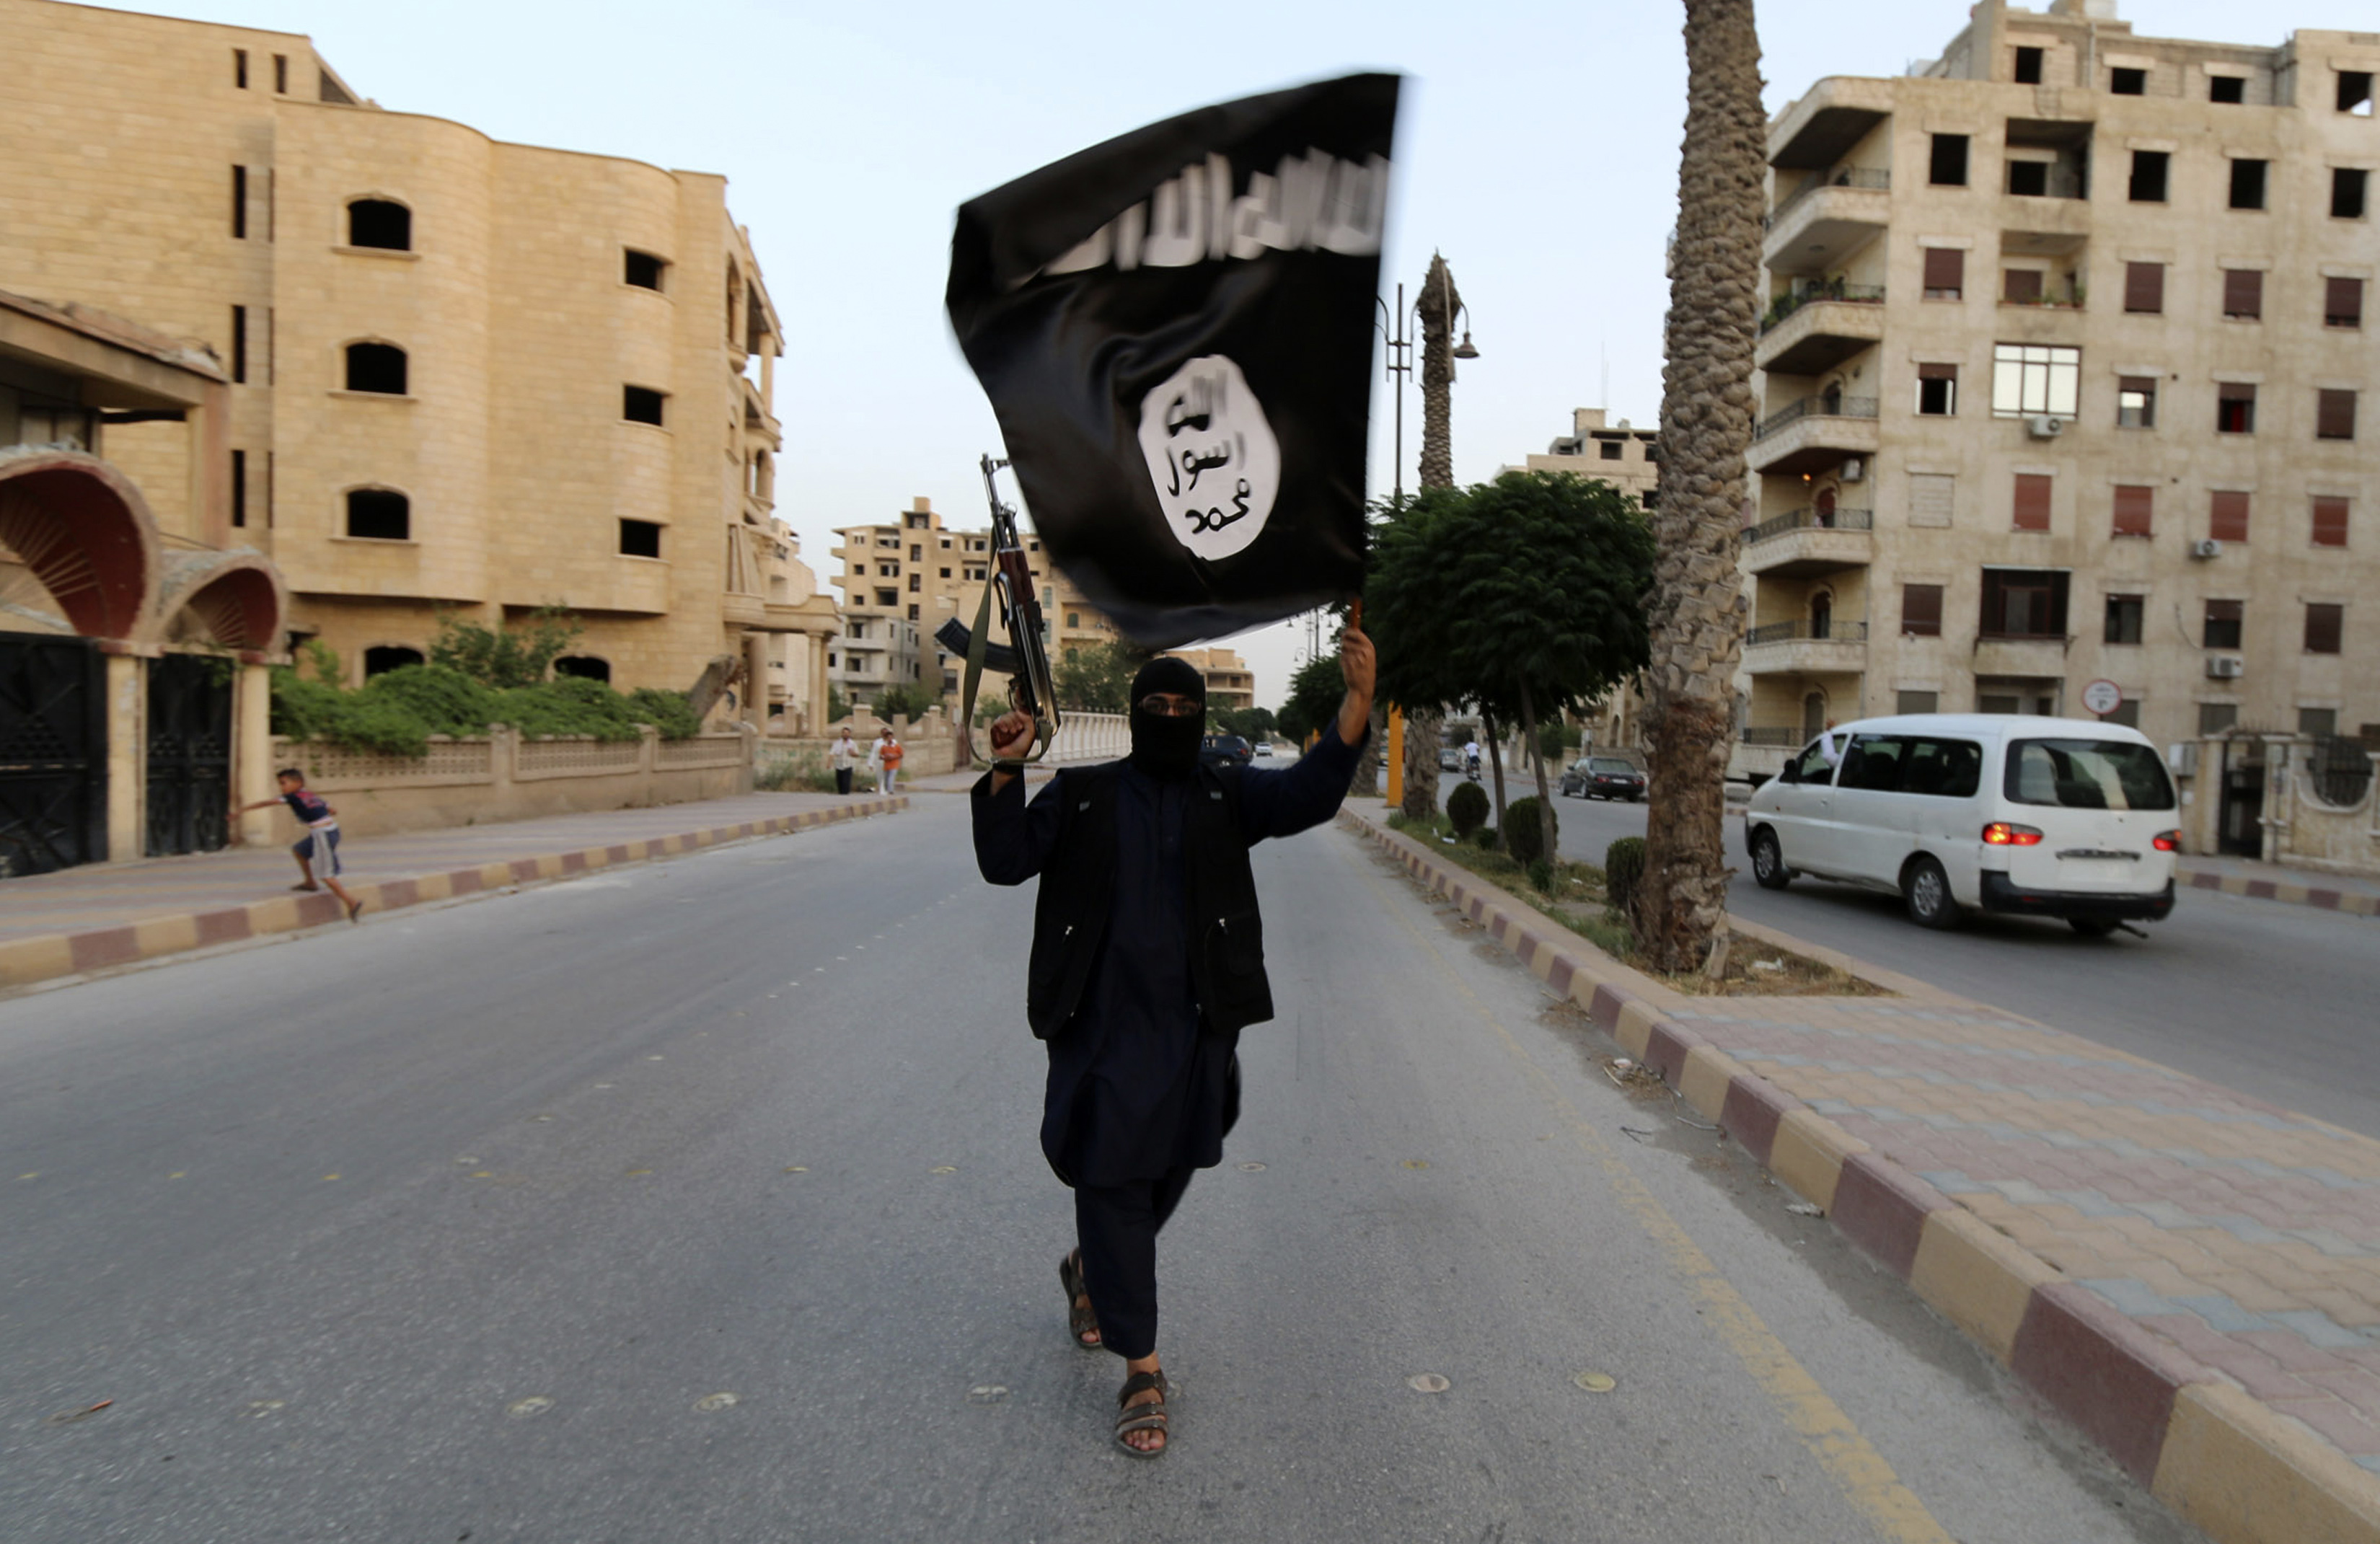 A member loyal to the Islamic State in Iraq and the Levant (ISIL) waves an ISIL flag in Raqqa June 29, 2014. (Stringer/Reuters)